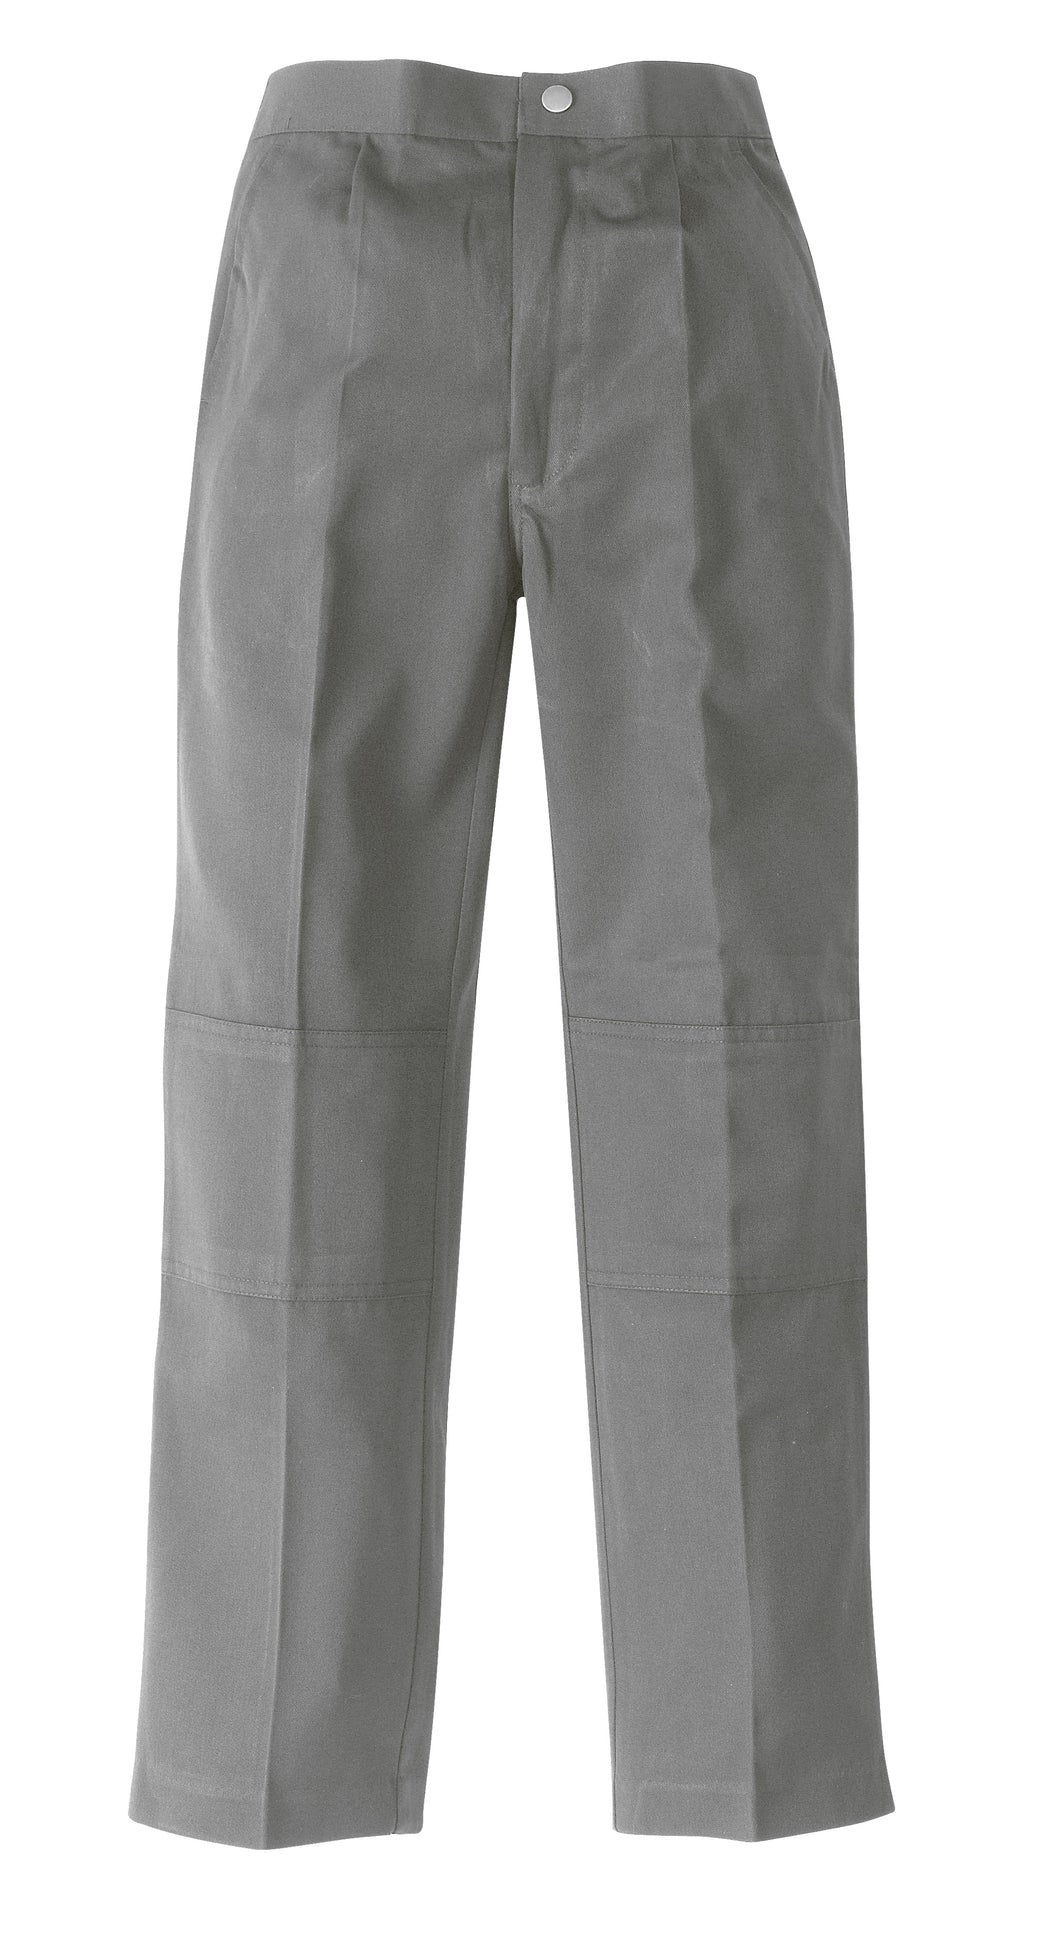 Second Hand Grey Trousers Option 2